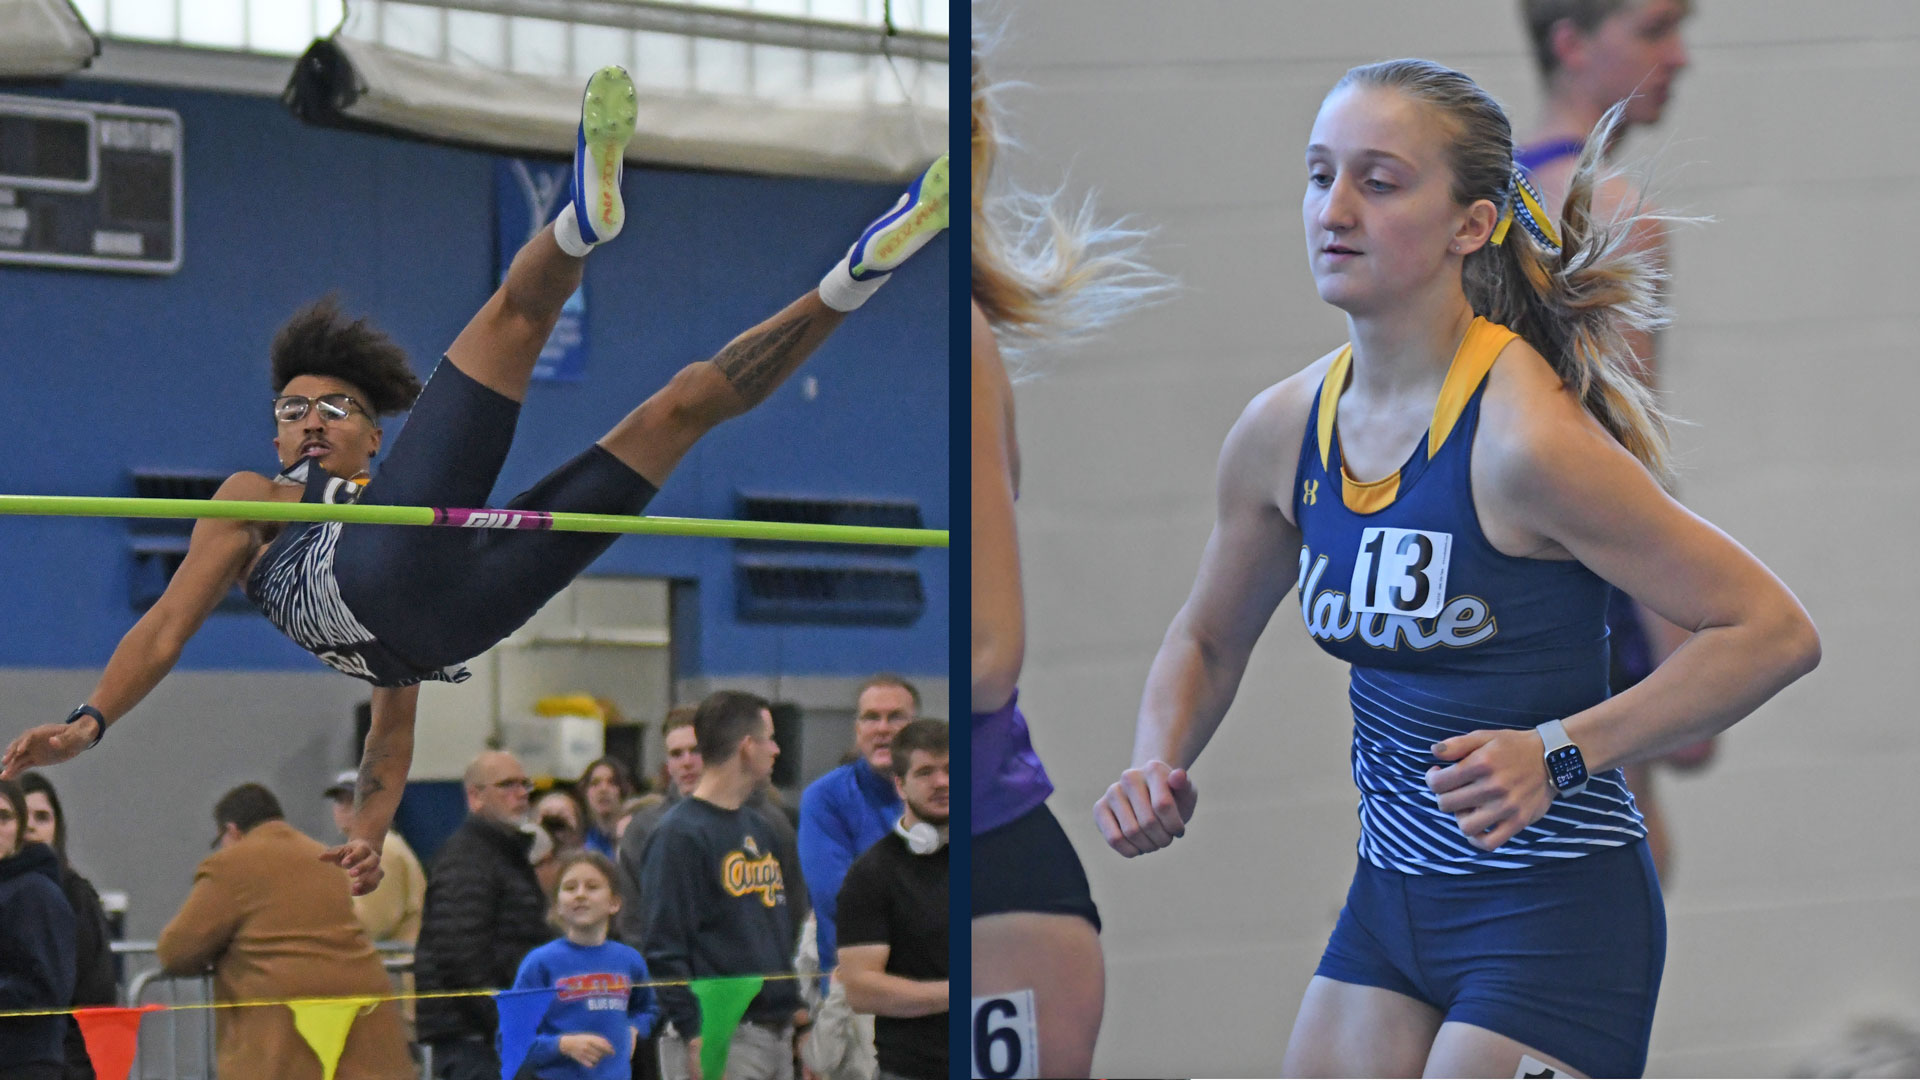 Pride close out final indoor meet before conference at UW-Platteville